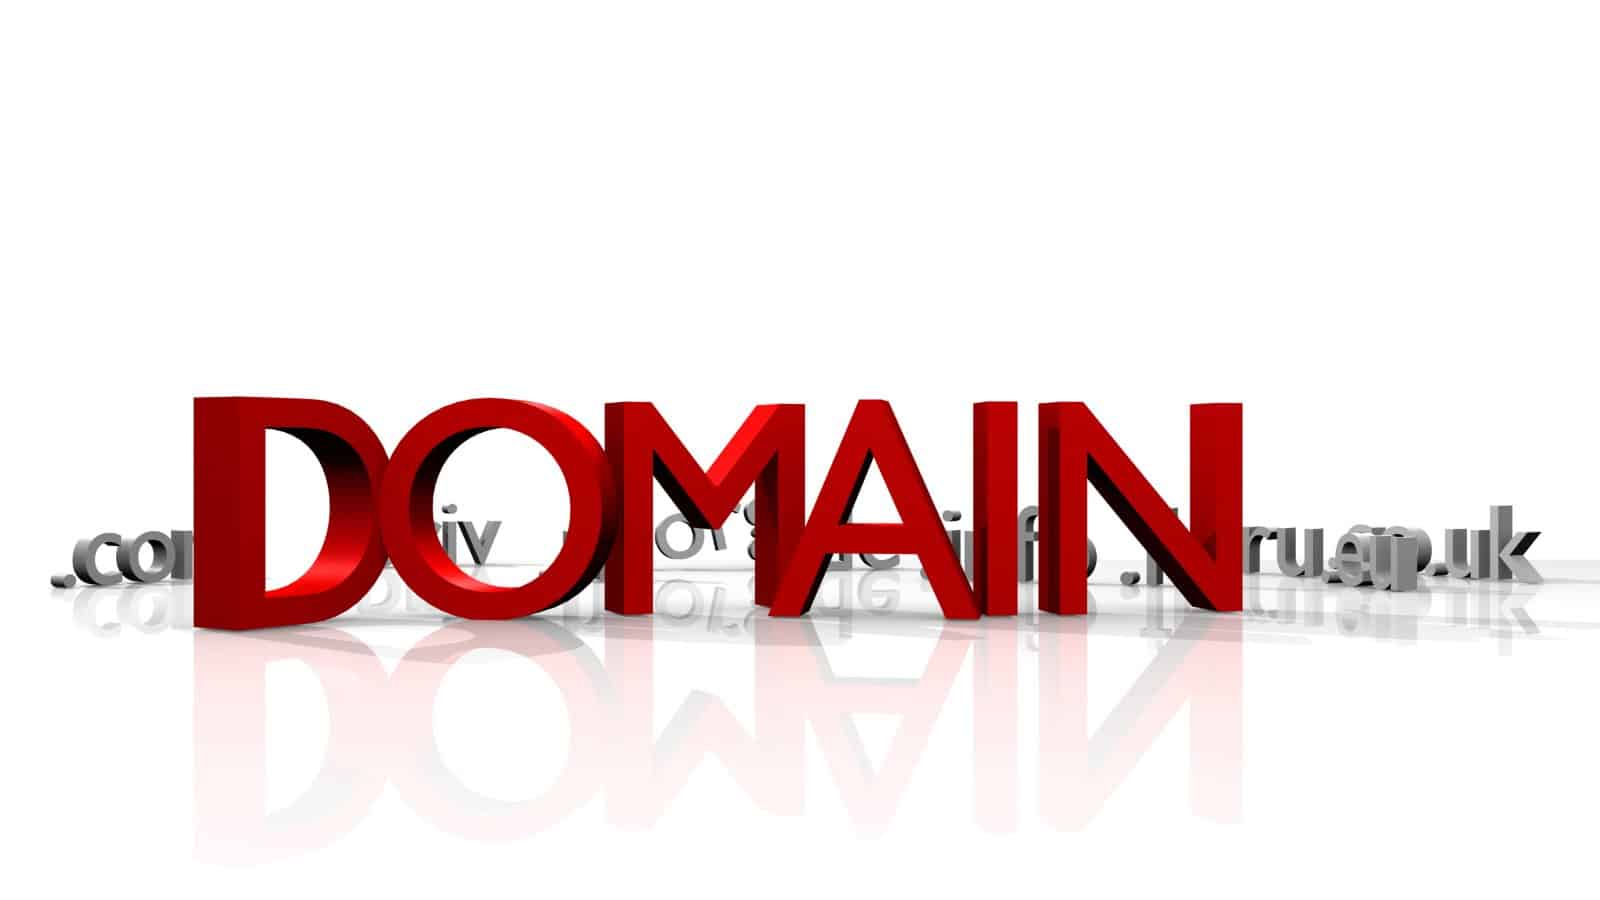 What is domain example